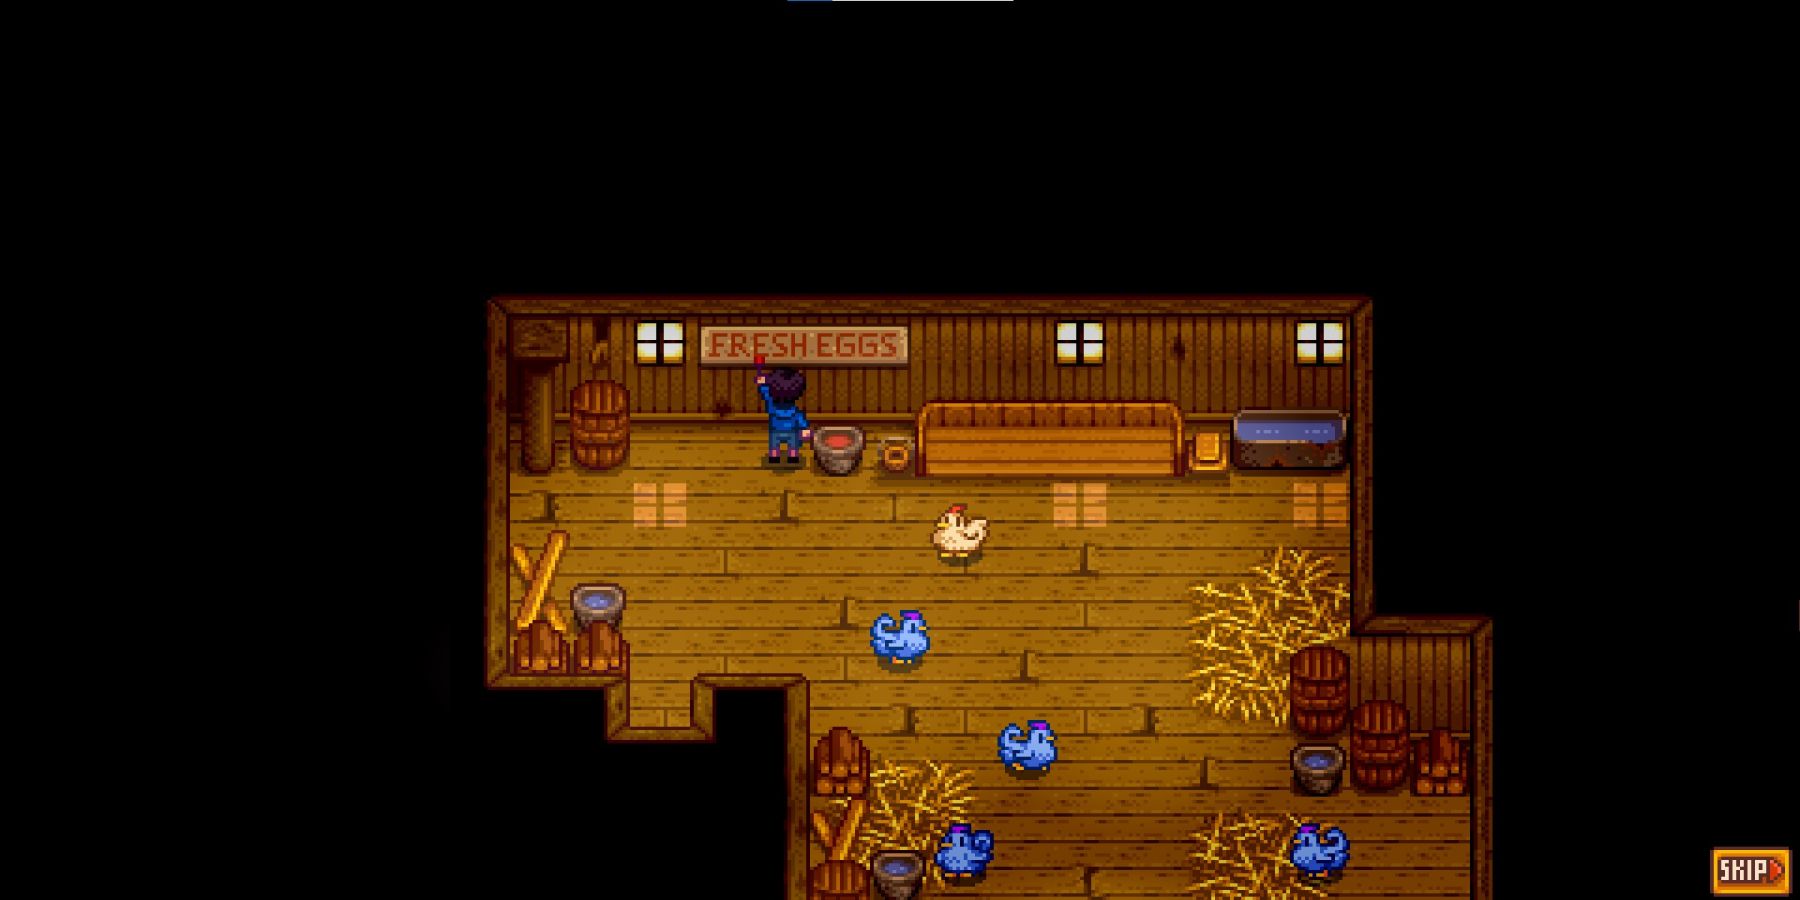 Shane's 8 Heart Event in the chicken coup with blue hens running around.